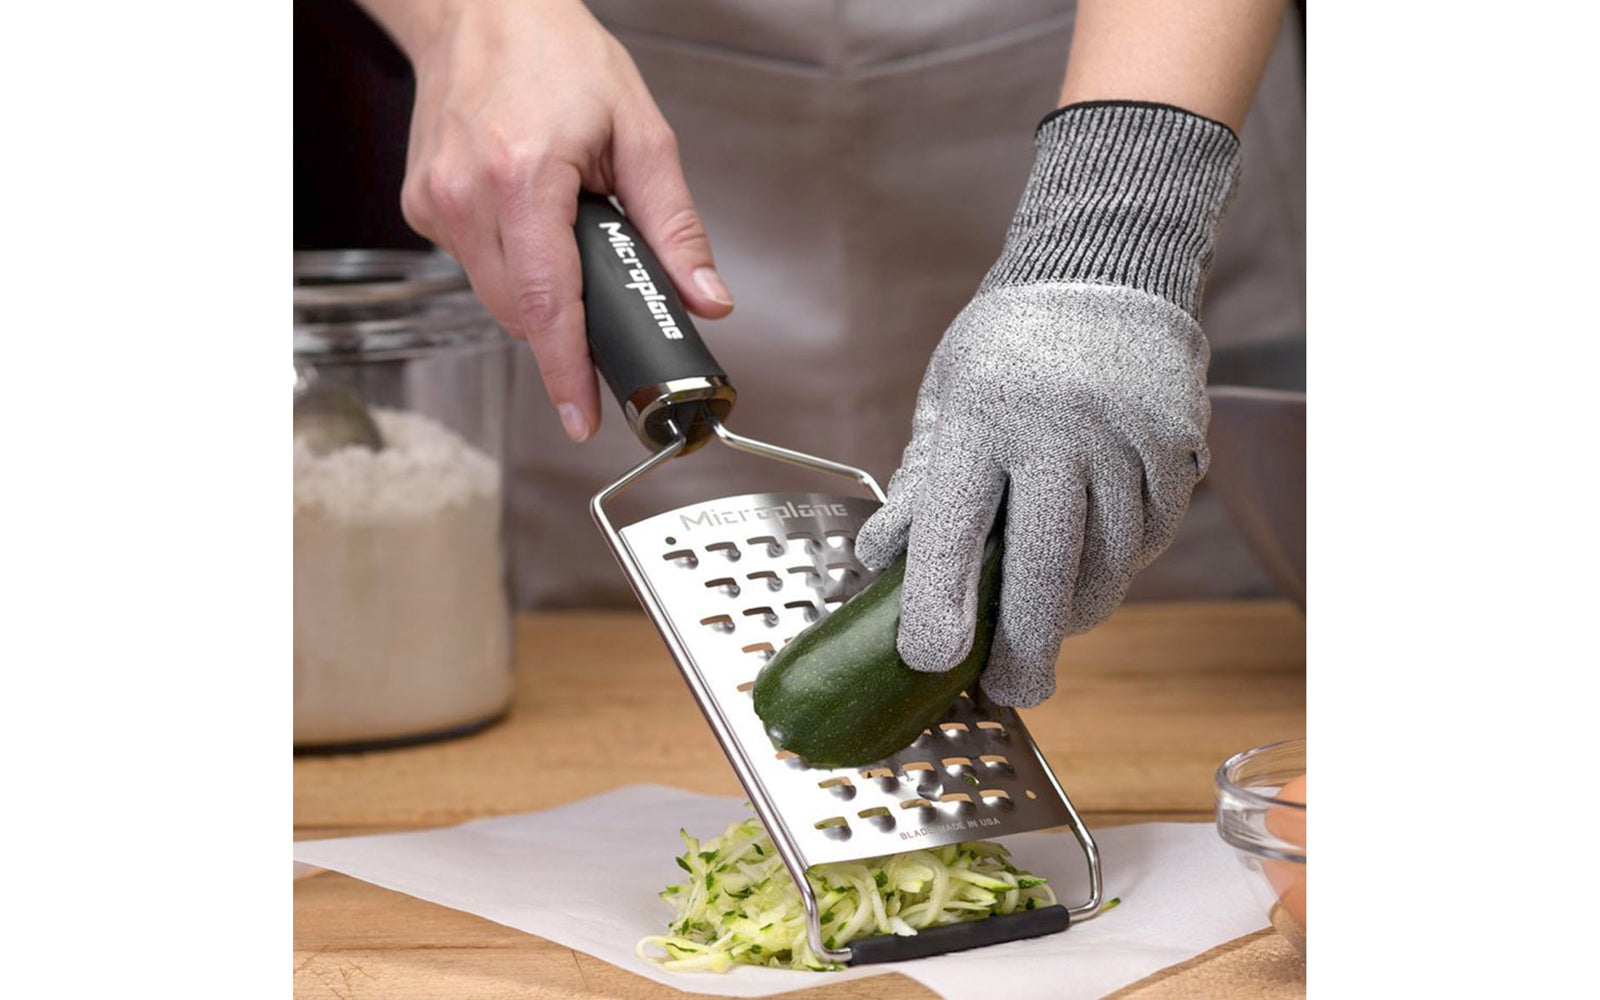 Microplane Cut Resistant glove - Model 34007 - Protects fingers & knuckles from grater blades - Medium and Large Size Glove - Fits both Right & Left hands - Easy to clean: Machine washable, drip dry - MED Size - LG Size - Protects hand from sharp Microplane tools - FDA compliant - Cut proof glove - Safety glove 